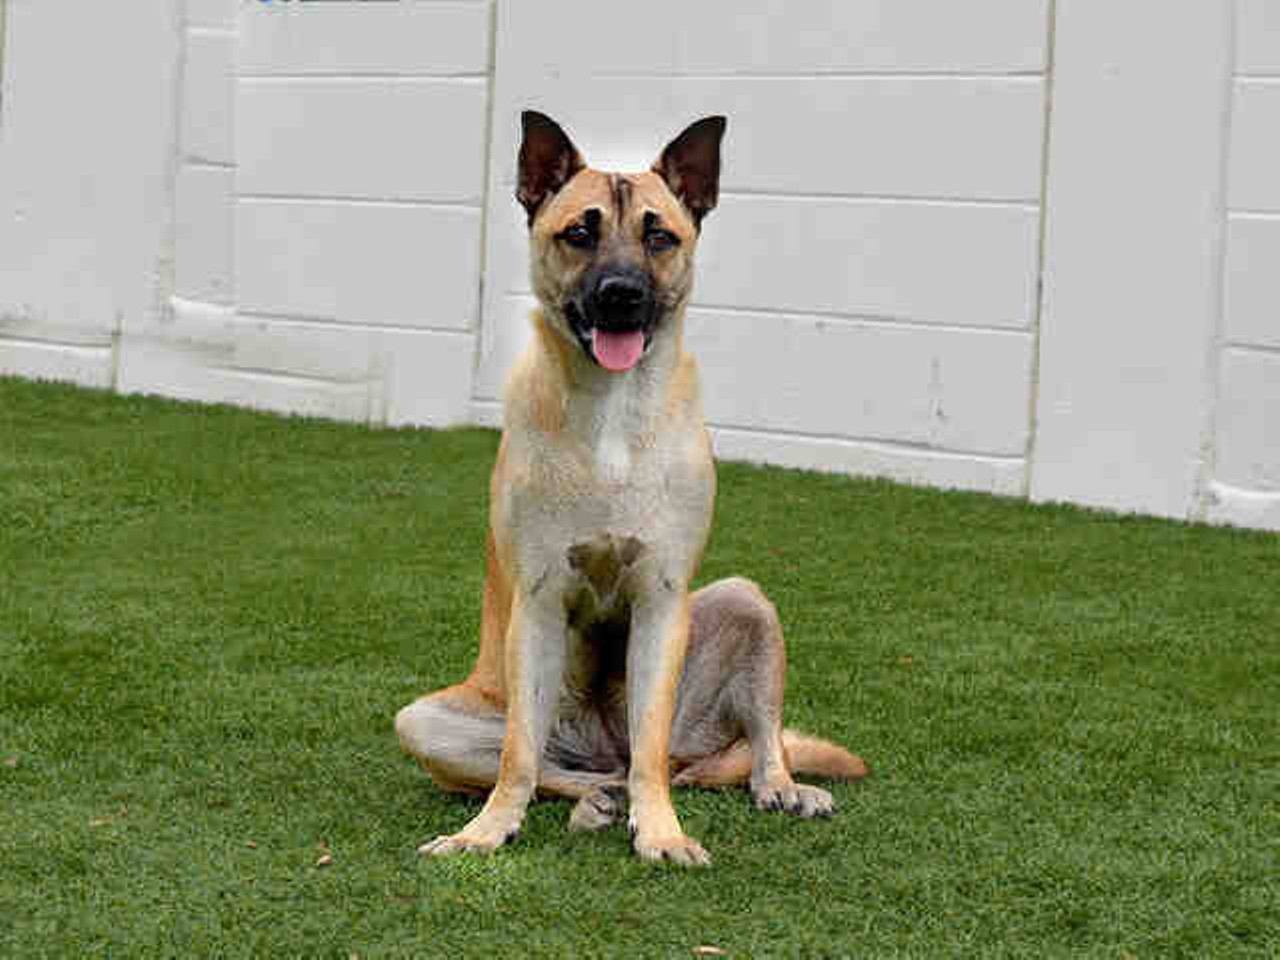 Jade, shelter ID A266144